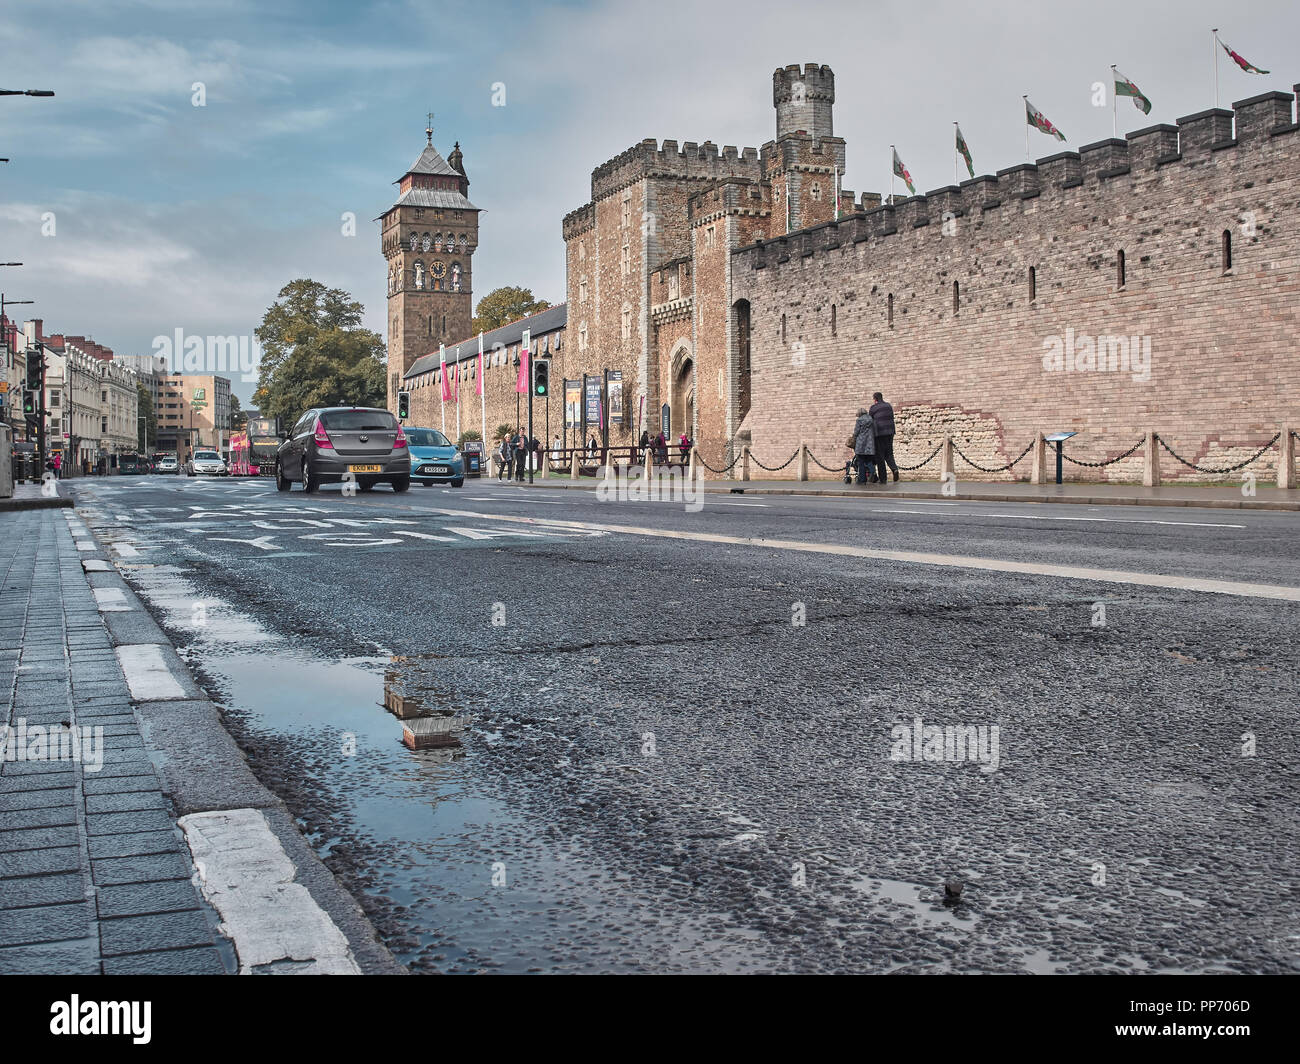 Cardiff, United Kingdom - September 16, 2018: View of the walls around the castle of Cardiff Stock Photo